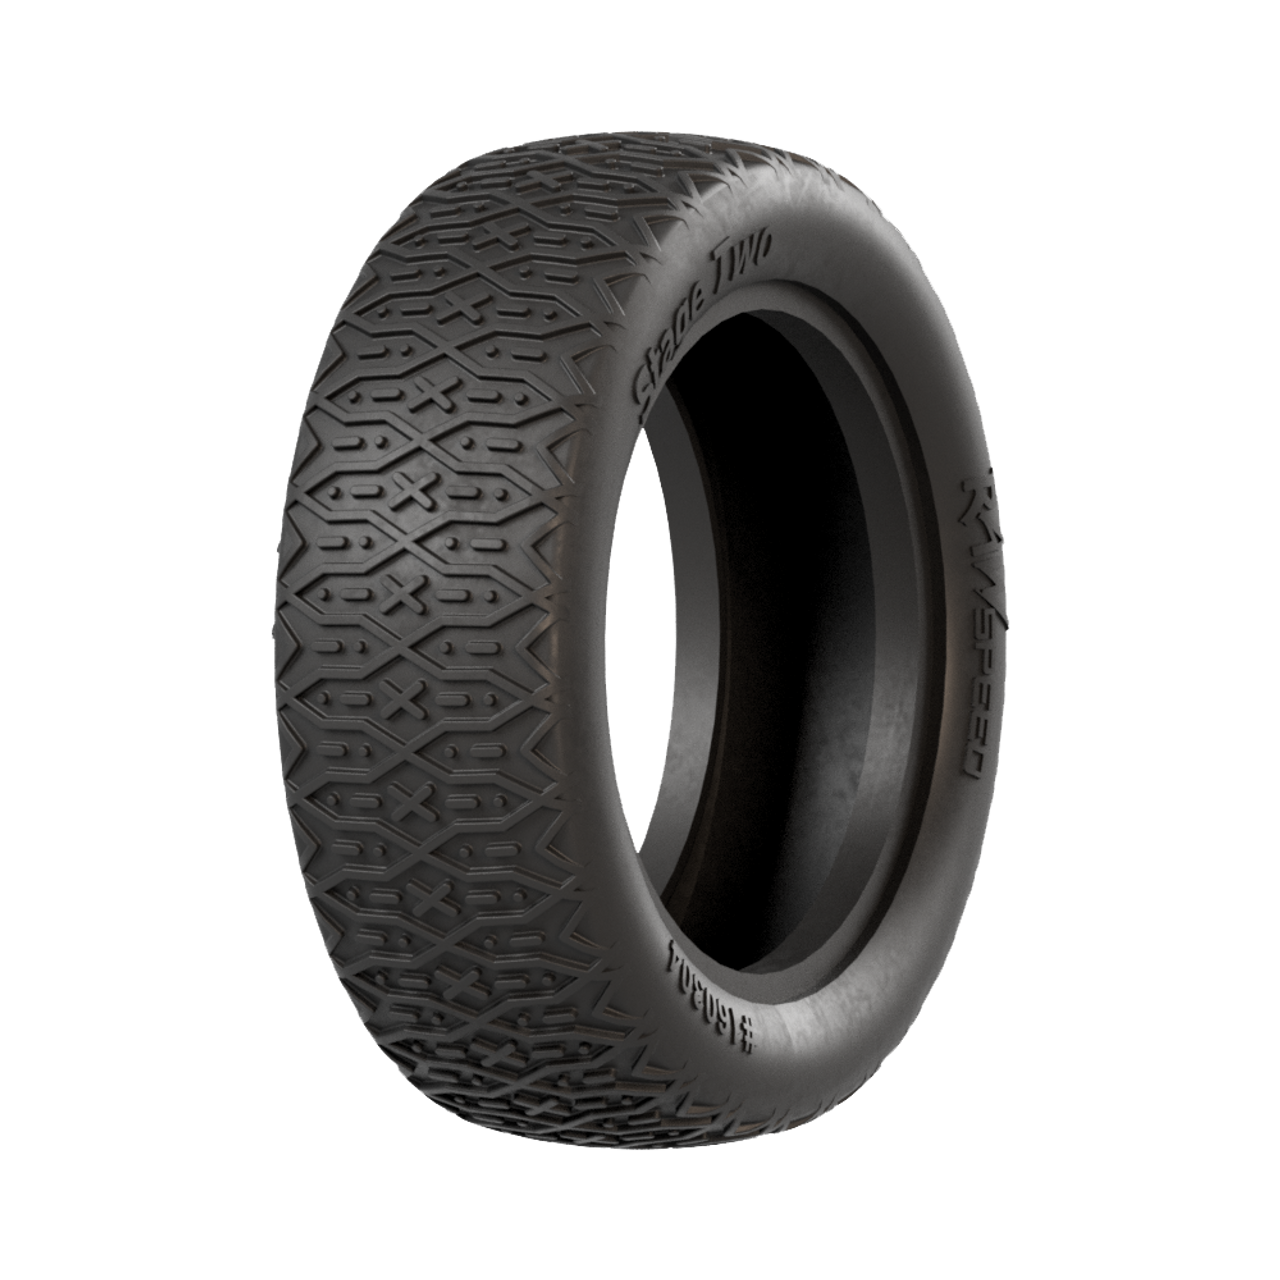 Raw Speed - Front 2WD Buggy Tires w/Inserts 2.2", 2-pack